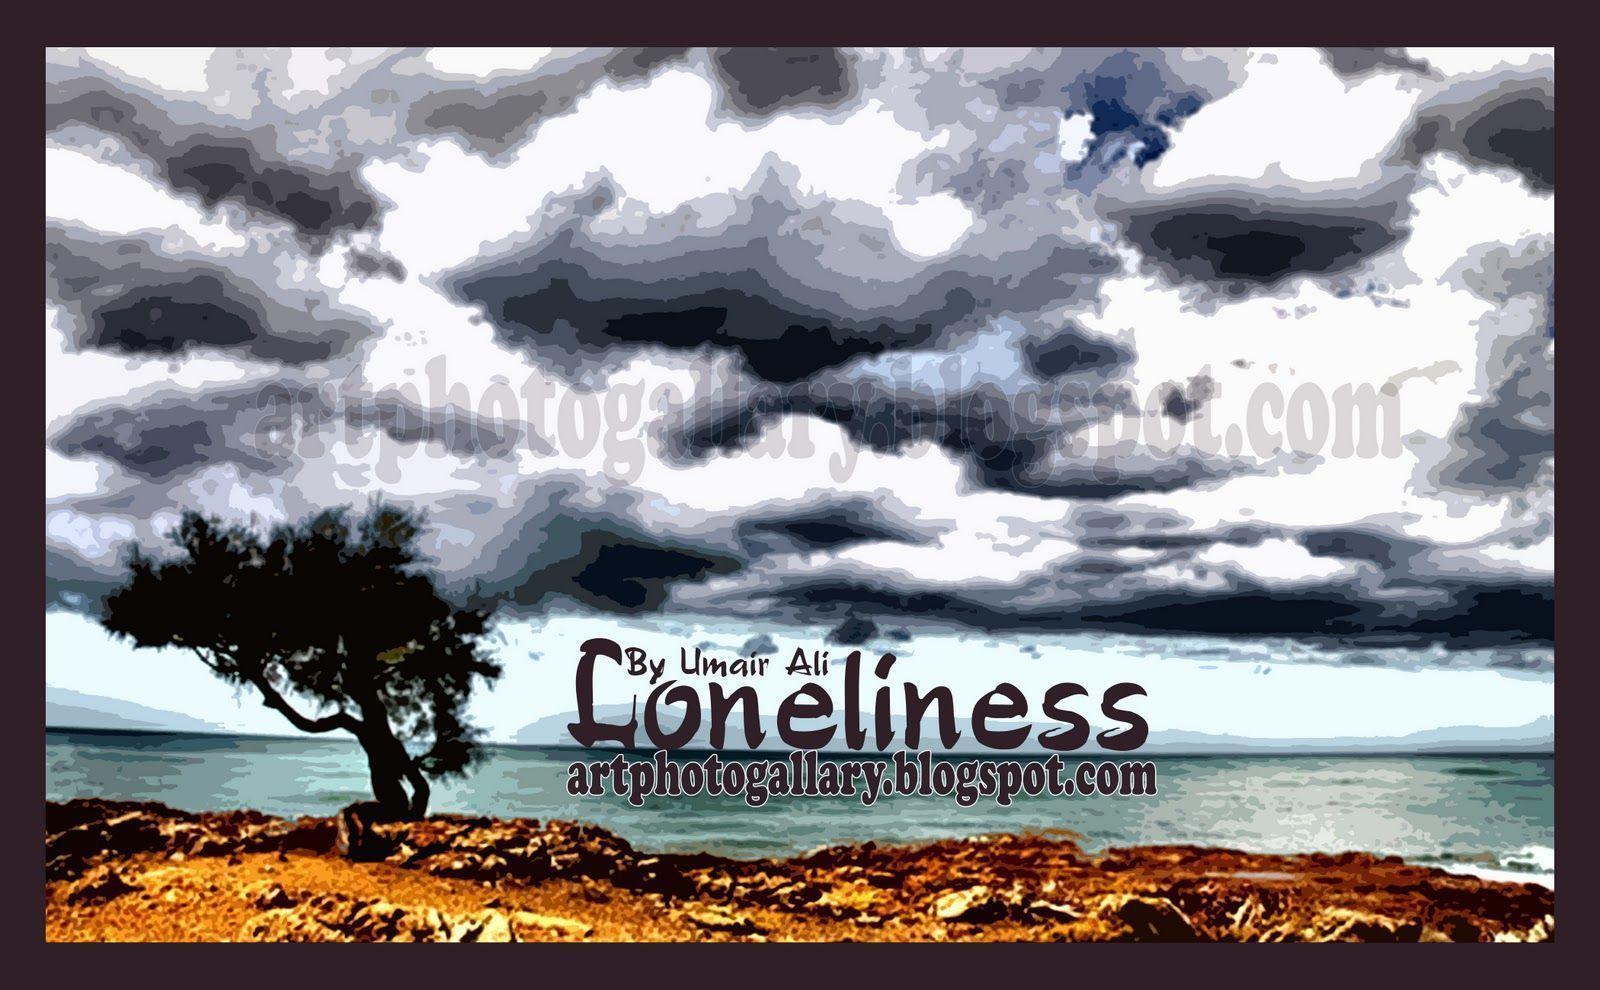 Loneliness Photo Gallery